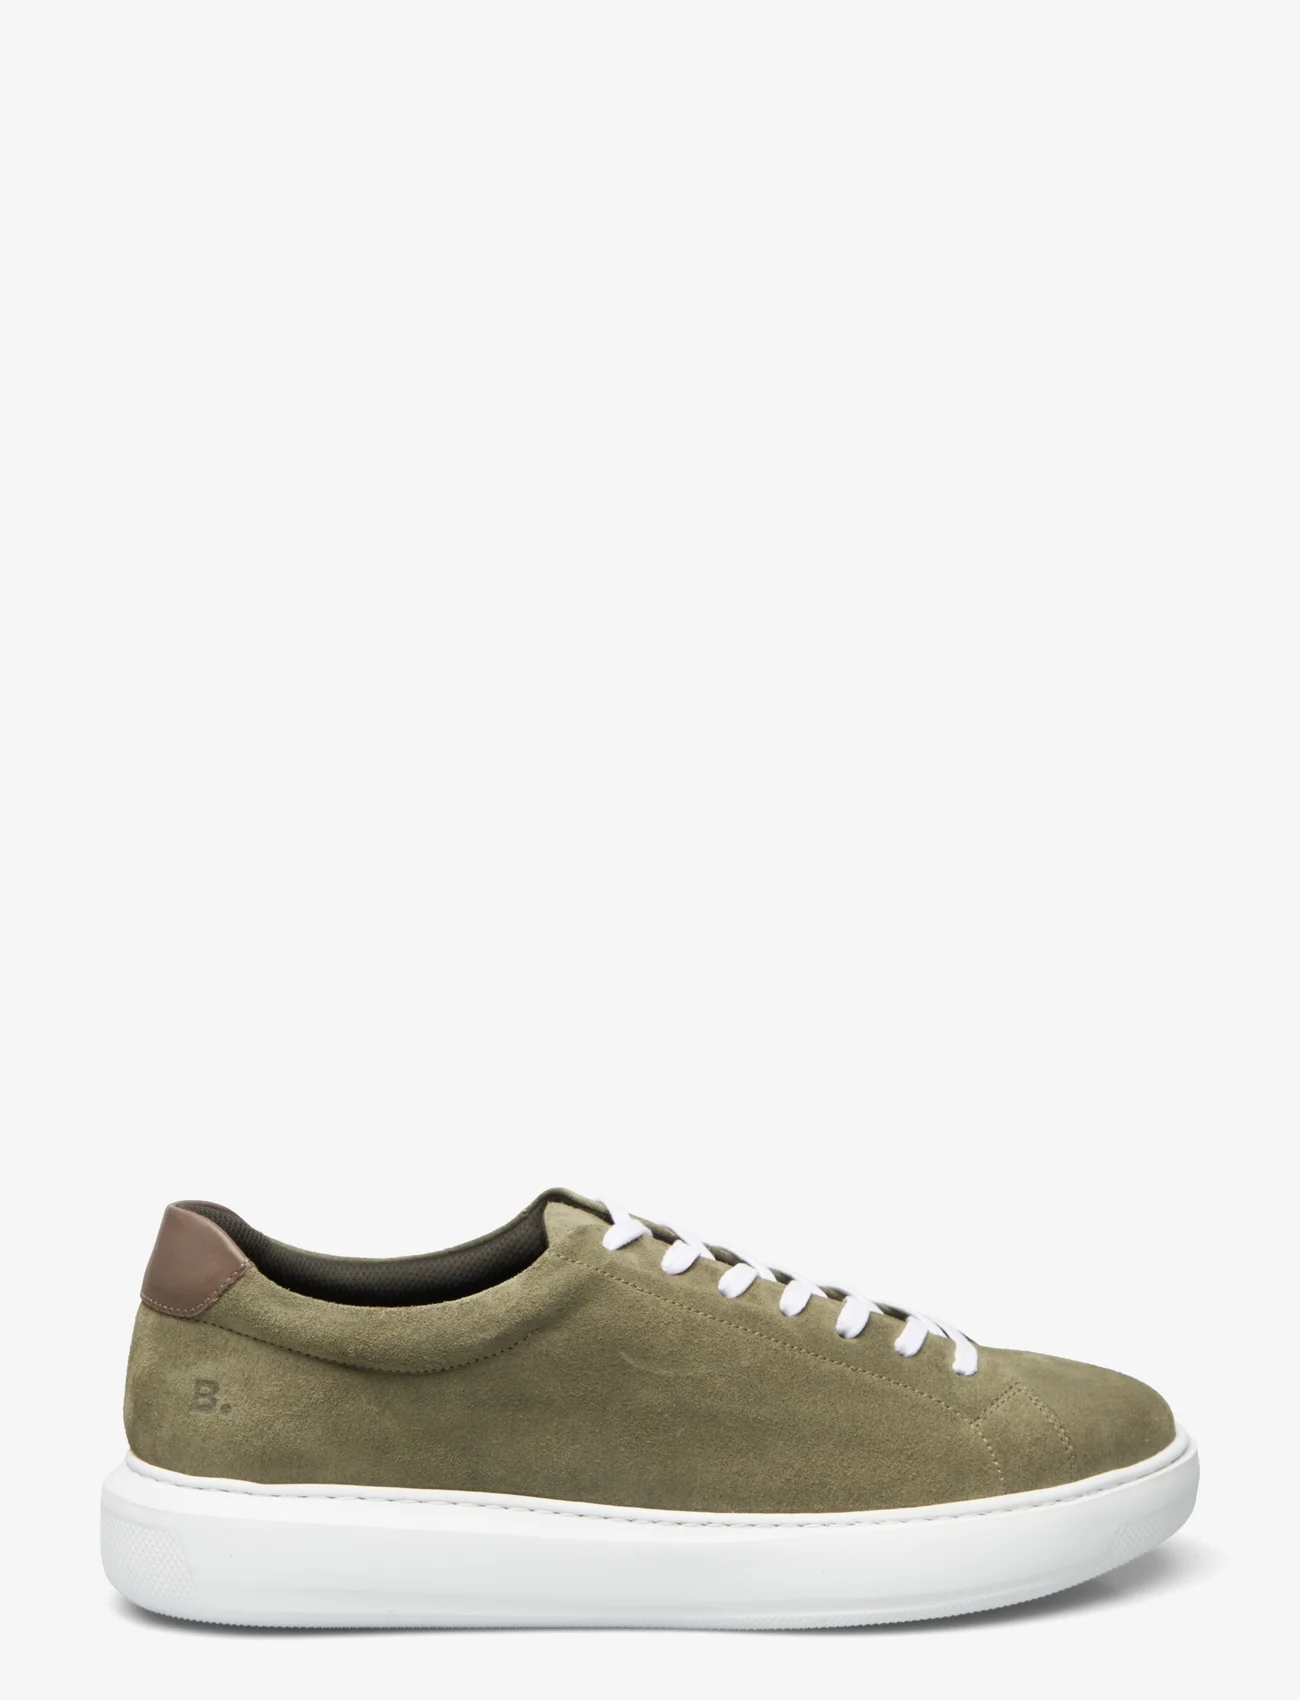 Bianco - BIAGARY Sneaker Suede - low tops - light olive - 1